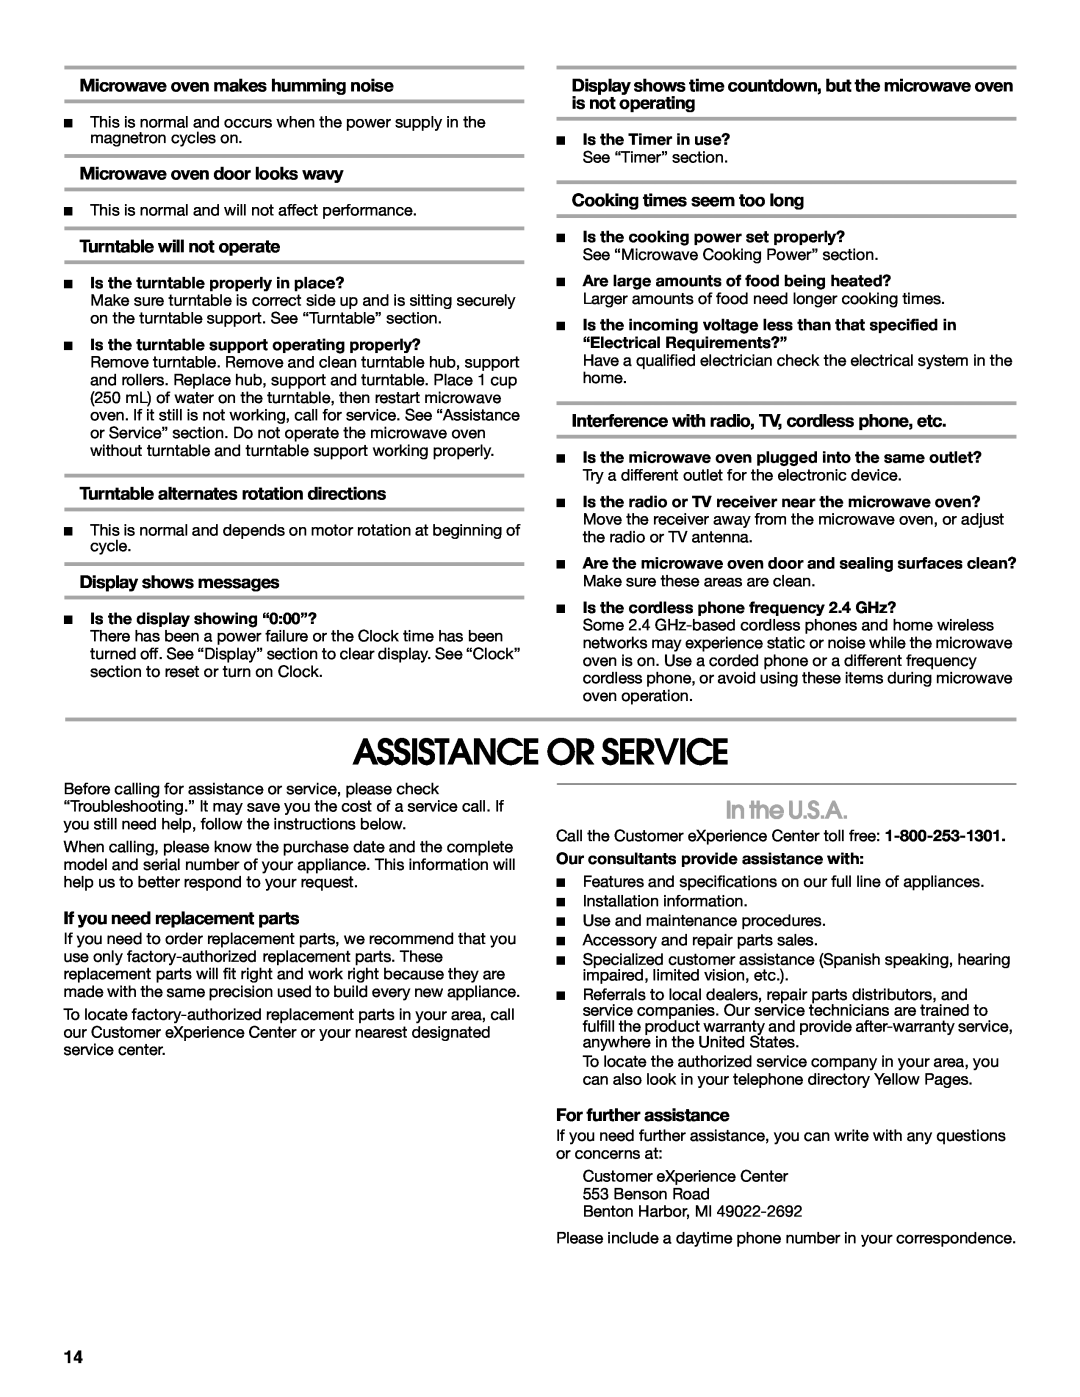 Whirlpool UMC5165 manual Assistance Or Service, In the U.S.A 